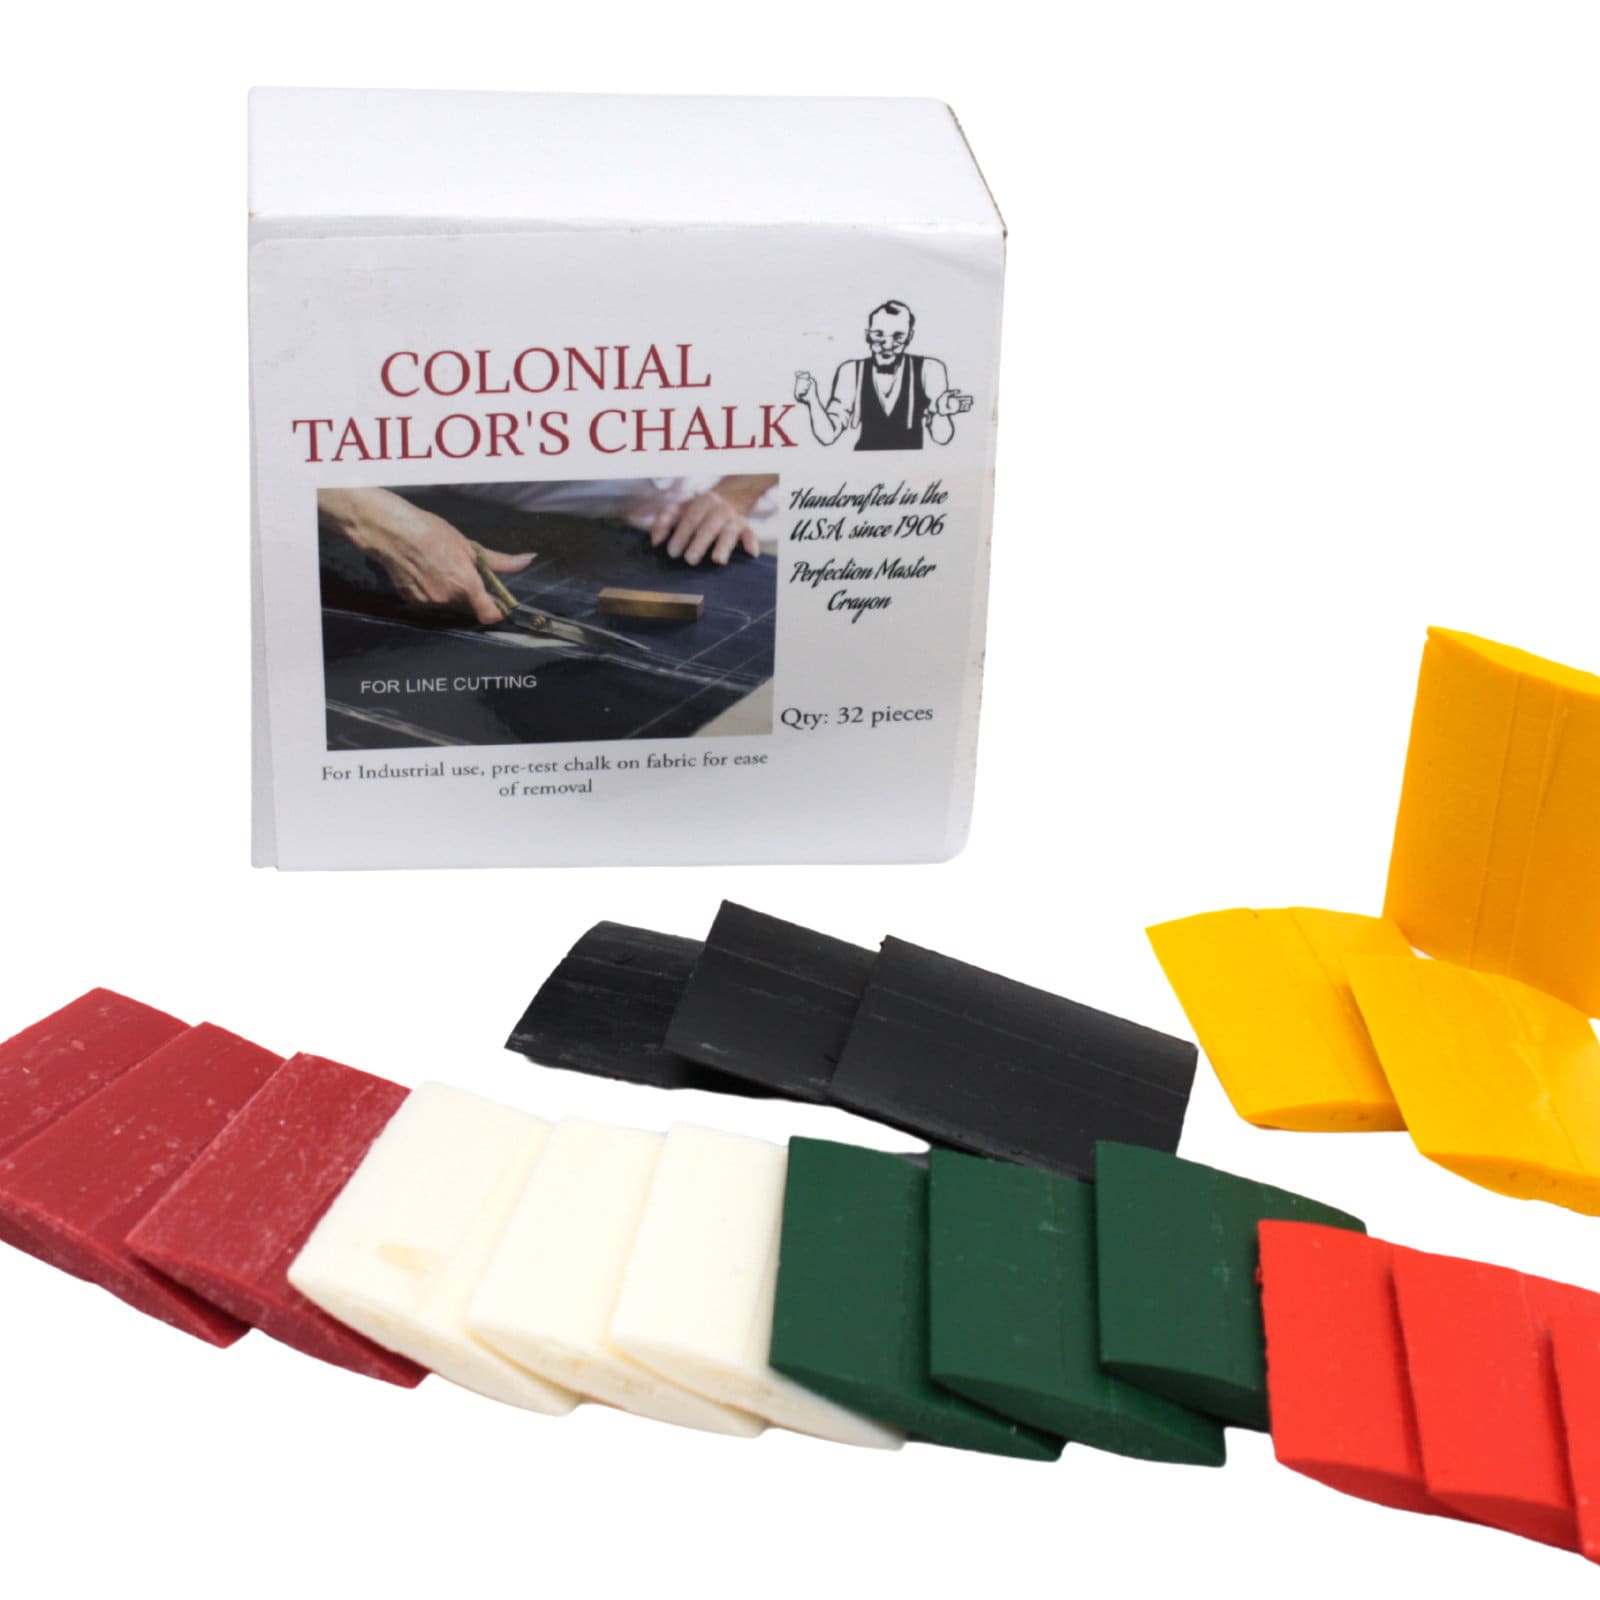 Trippelware Tailors' Chalk (32 pieces)